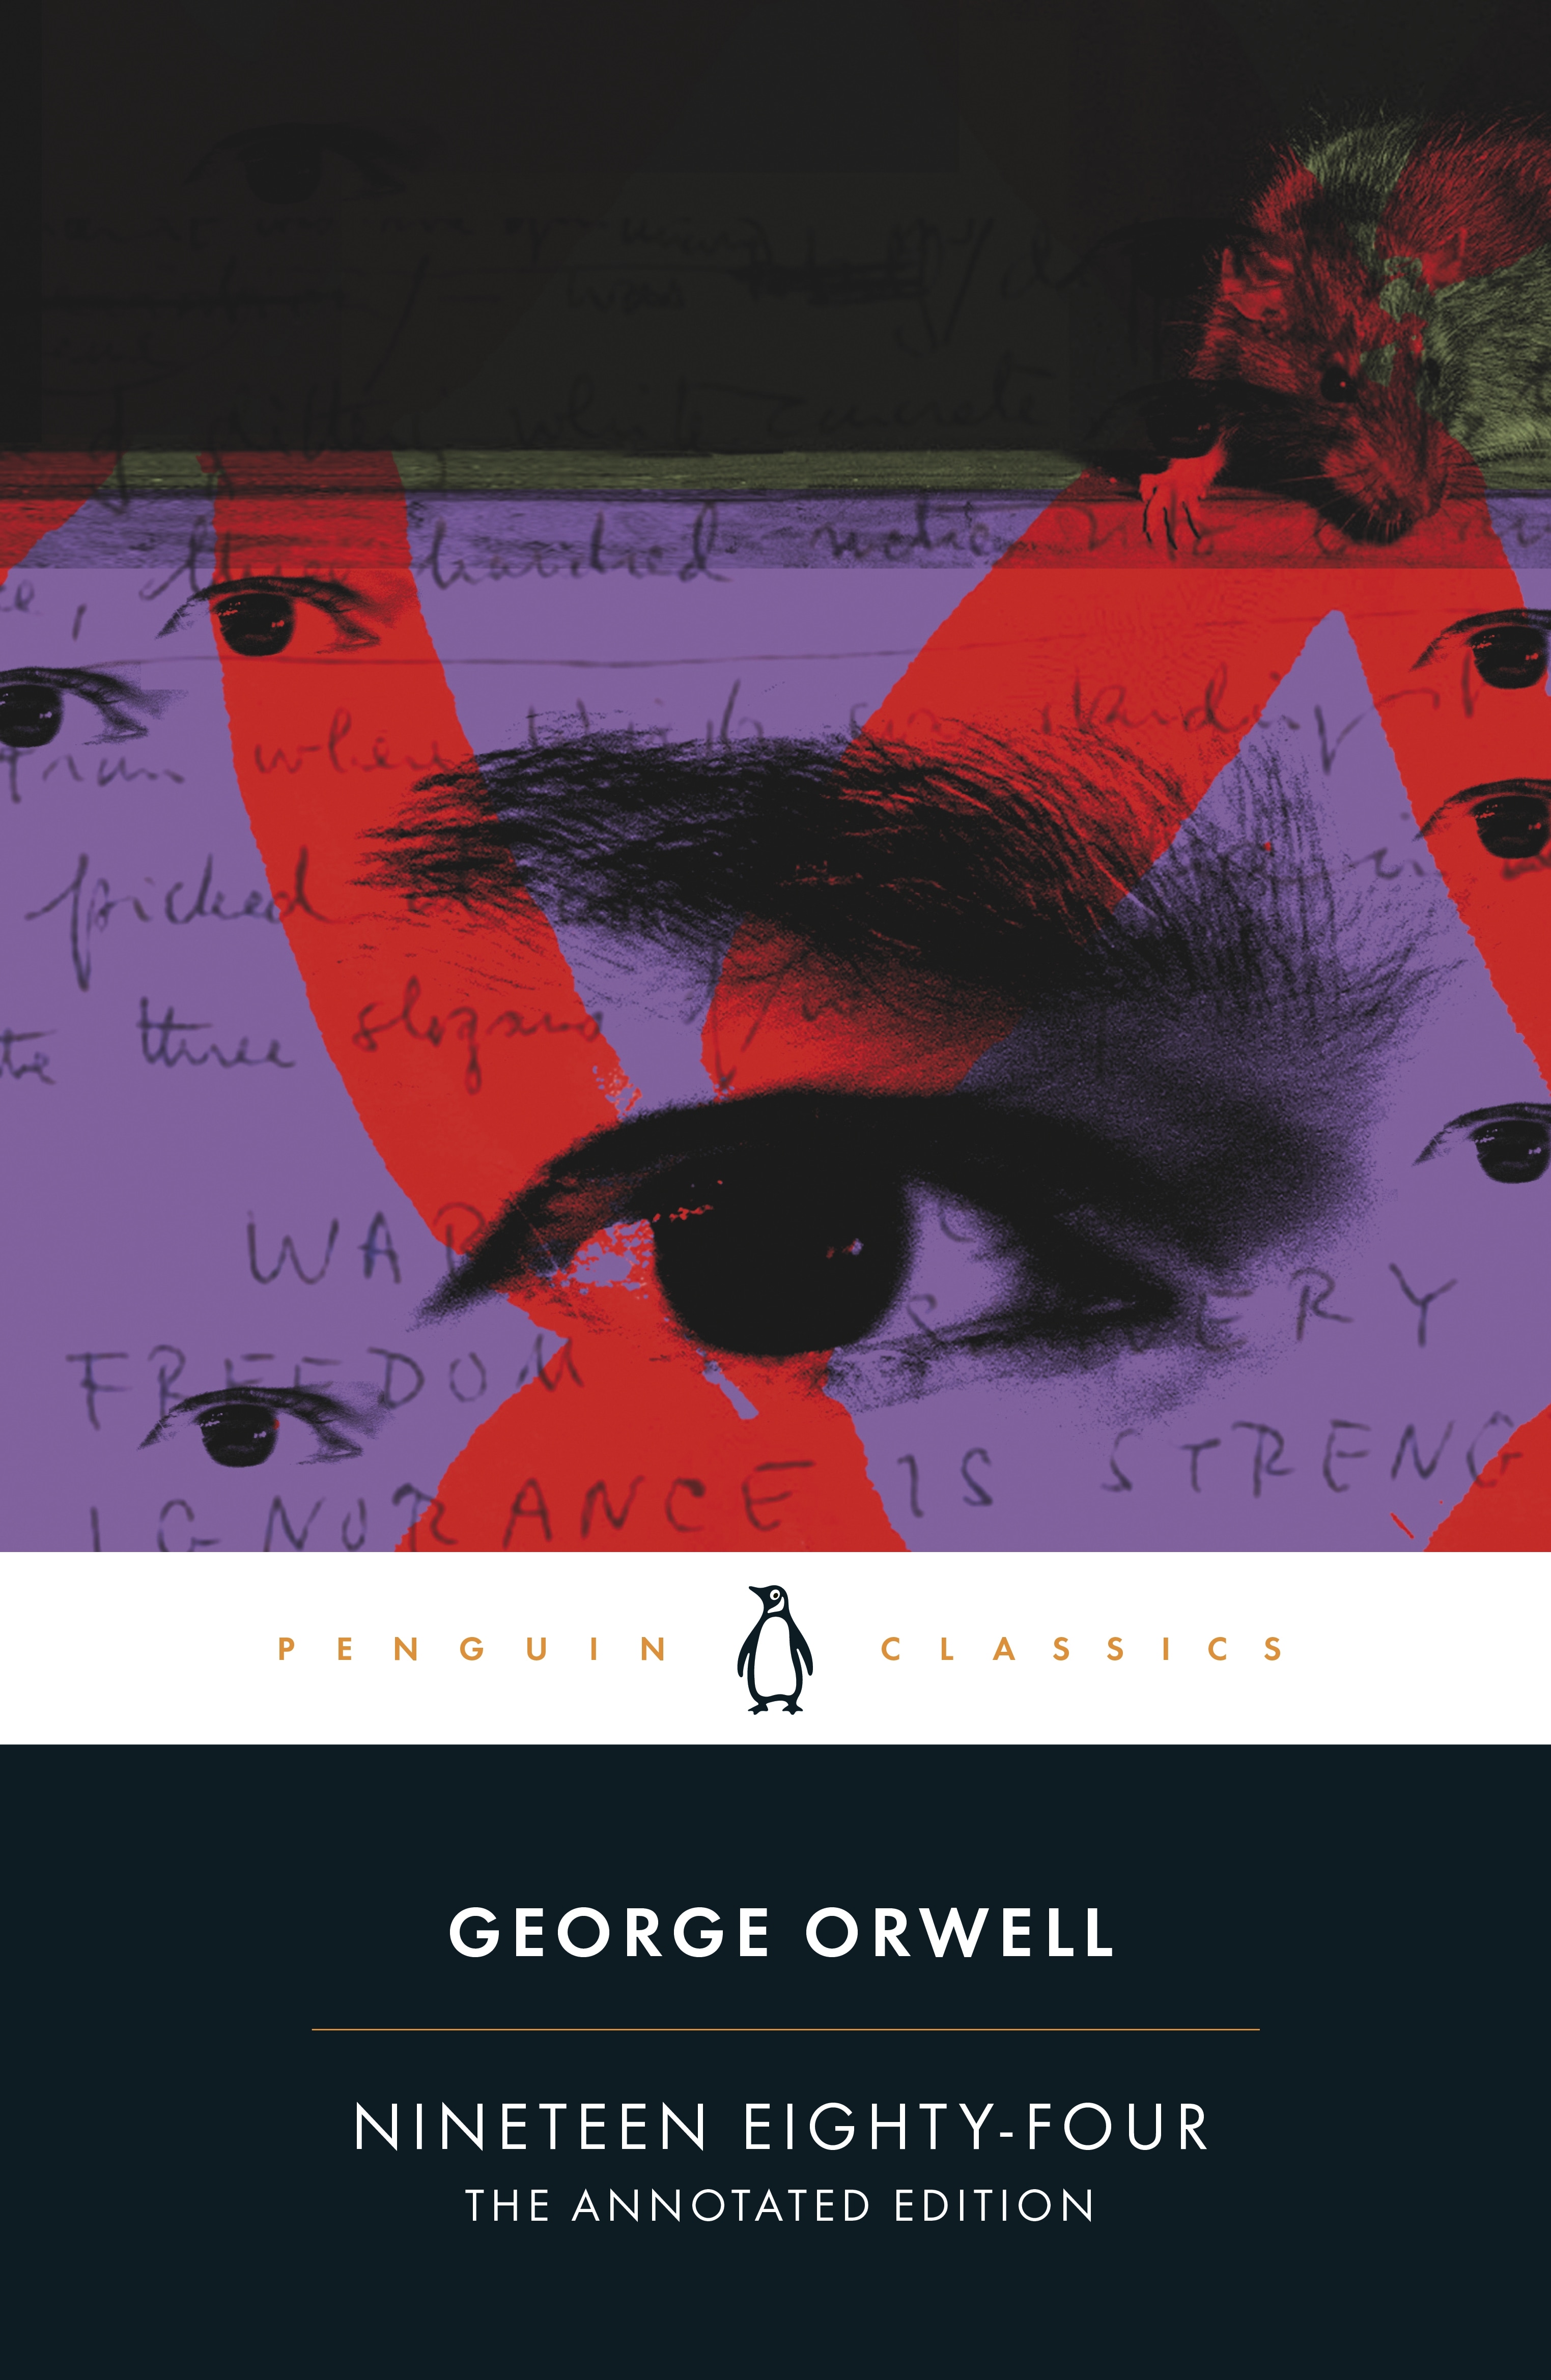 Book “Nineteen Eighty-Four” by George Orwell, Thomas Pynchon — June 6, 2019